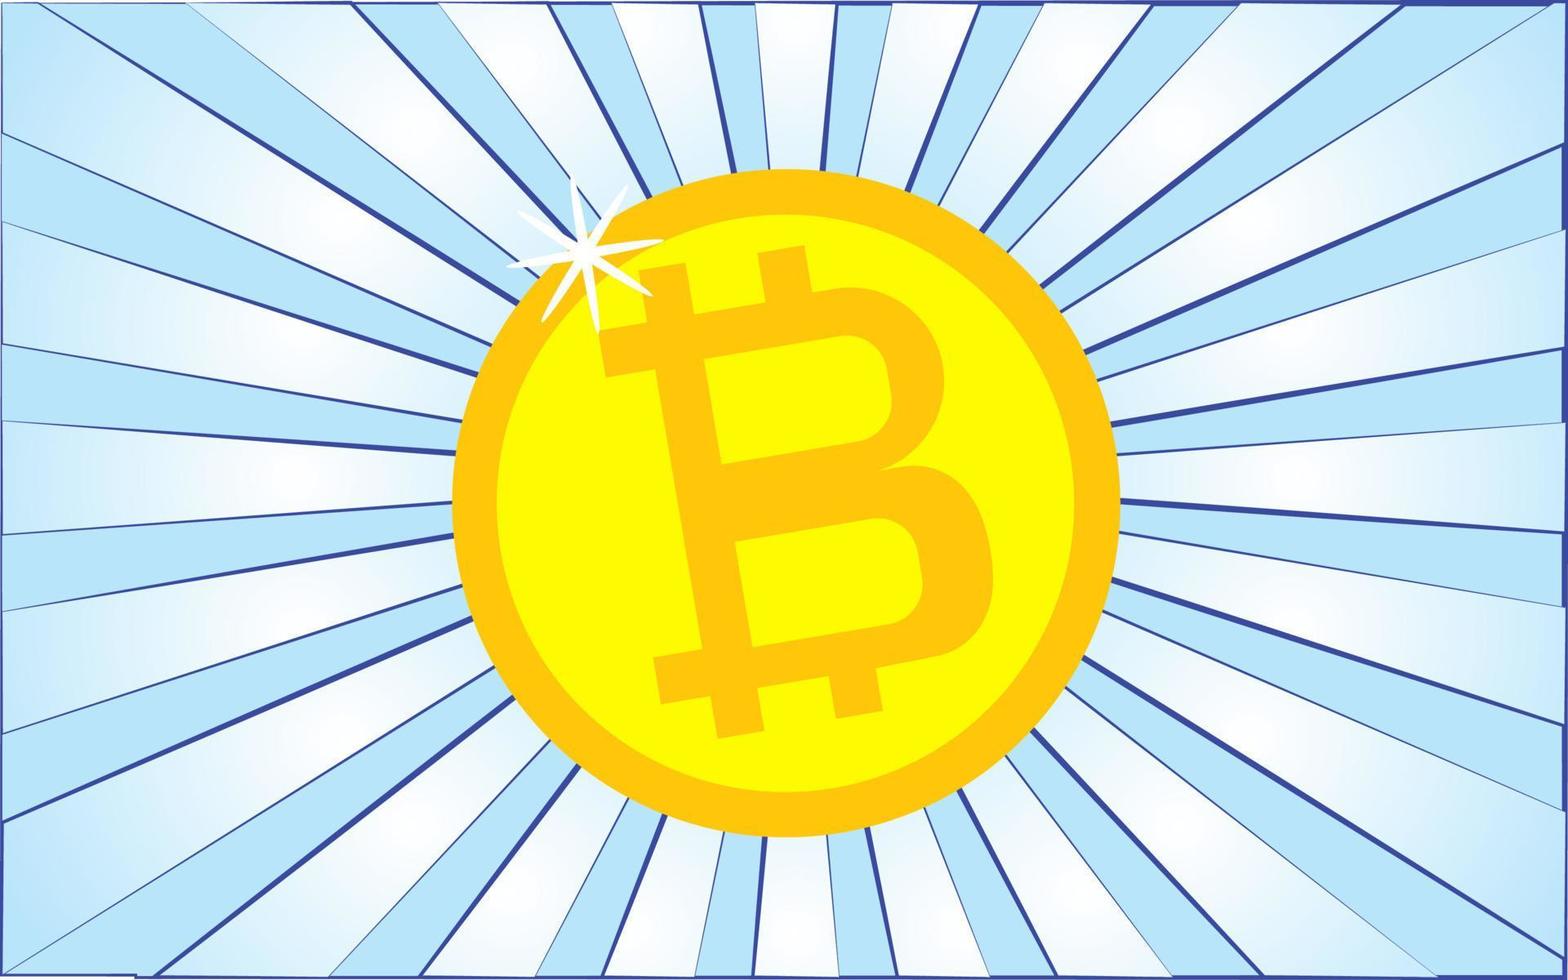 Golden round big Bitcoin cryptocurrency coin on a background of abstract blue rays. Vector illustration